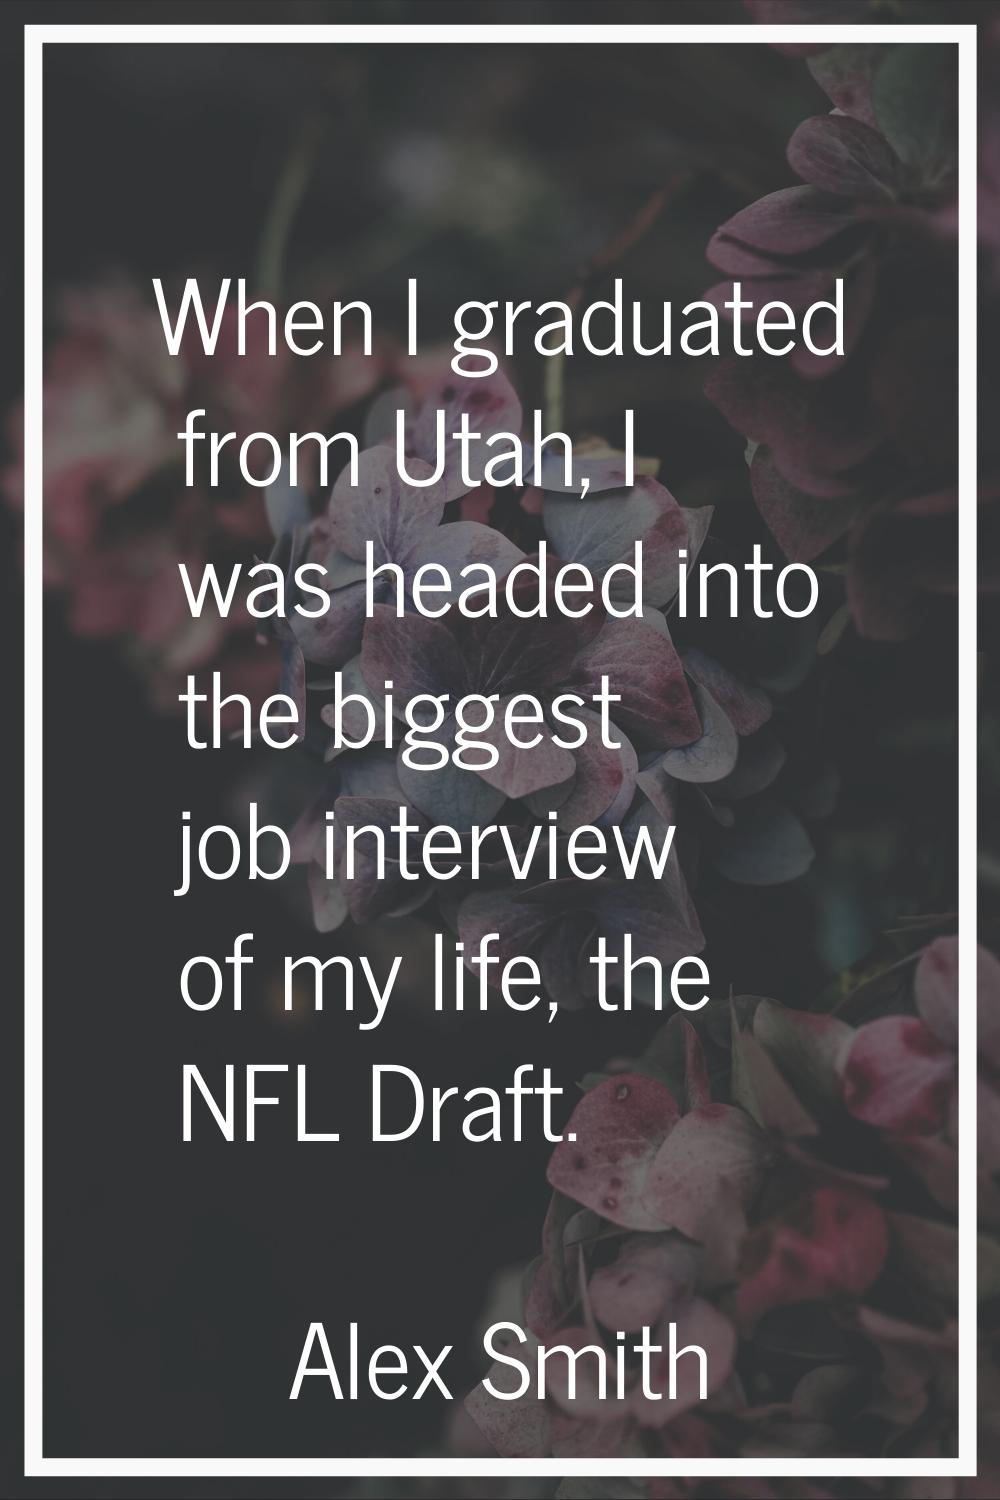 When I graduated from Utah, I was headed into the biggest job interview of my life, the NFL Draft.